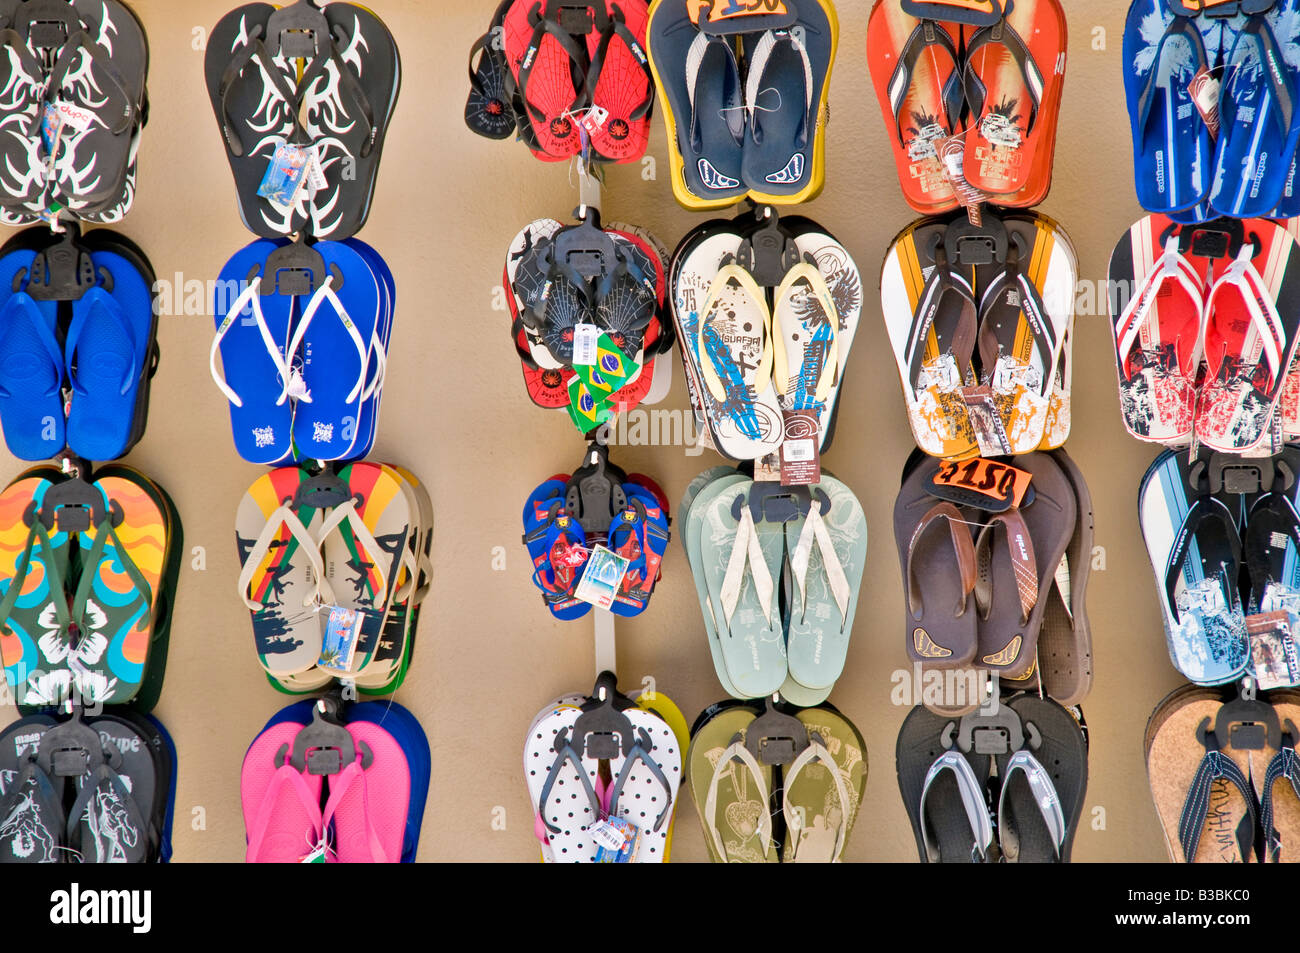 ZIHUATANEJO, Mexico - Flip-flops on display a shope in Zihuatanejo, Mexico Stock Photo